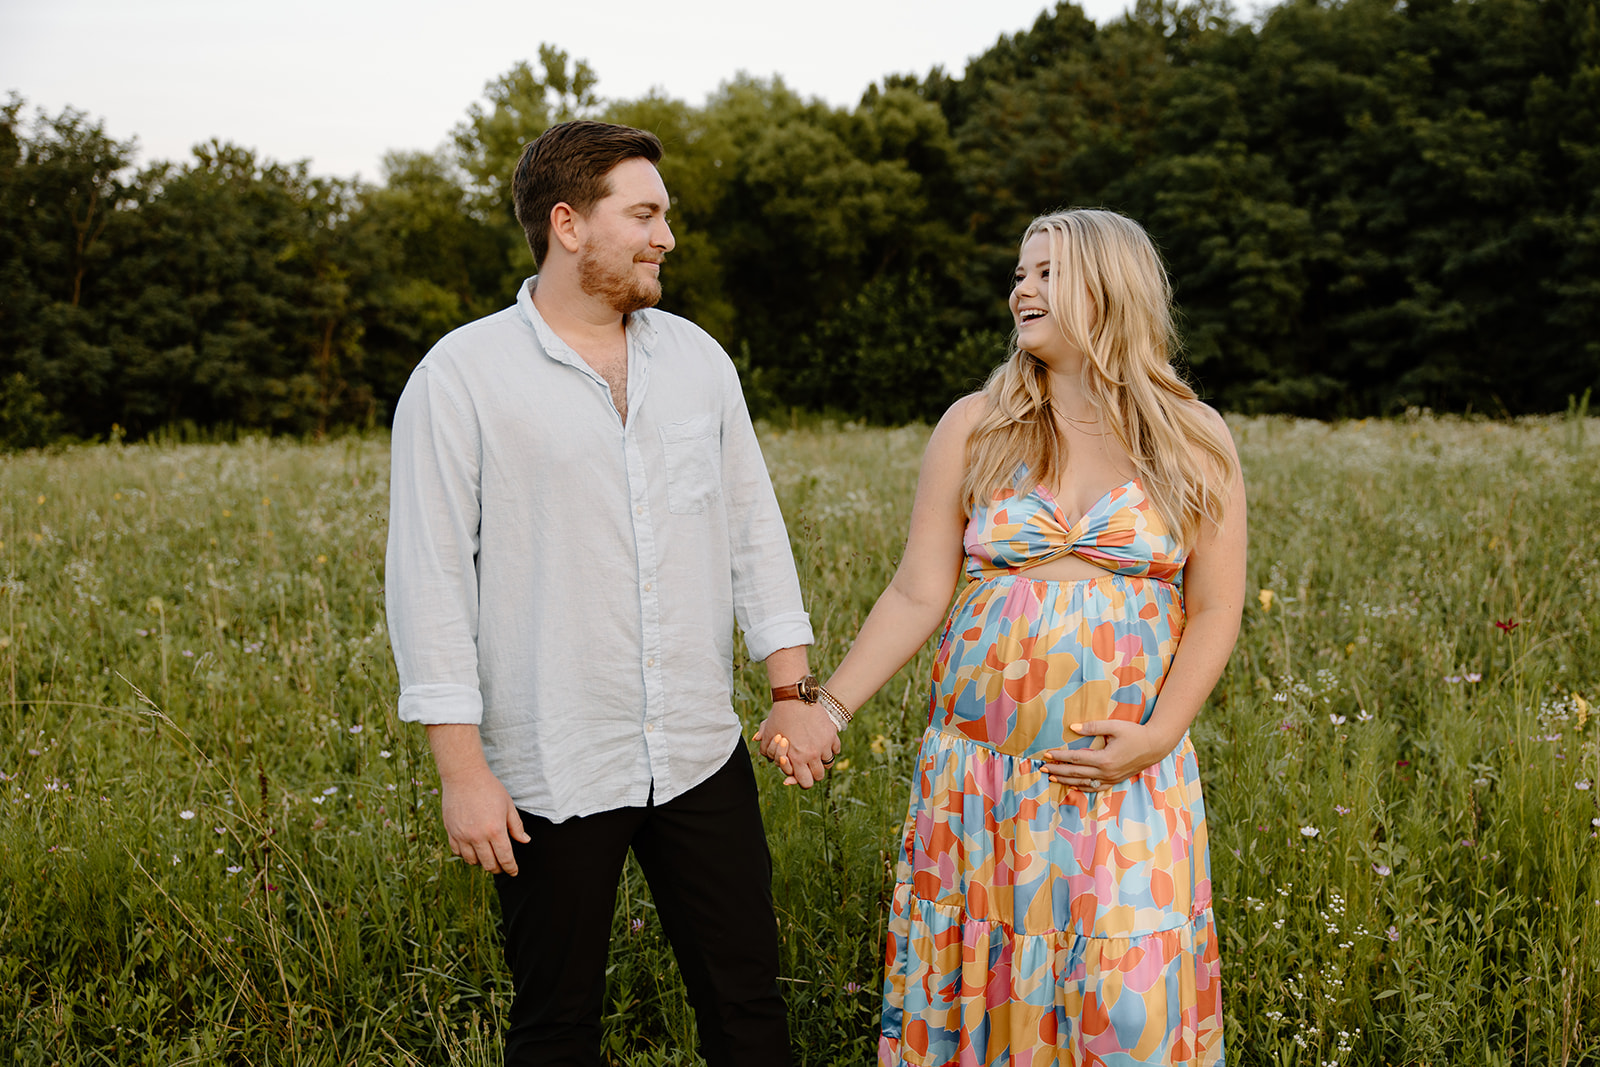 Location for pregnancy announcement photos in Raleigh, NC